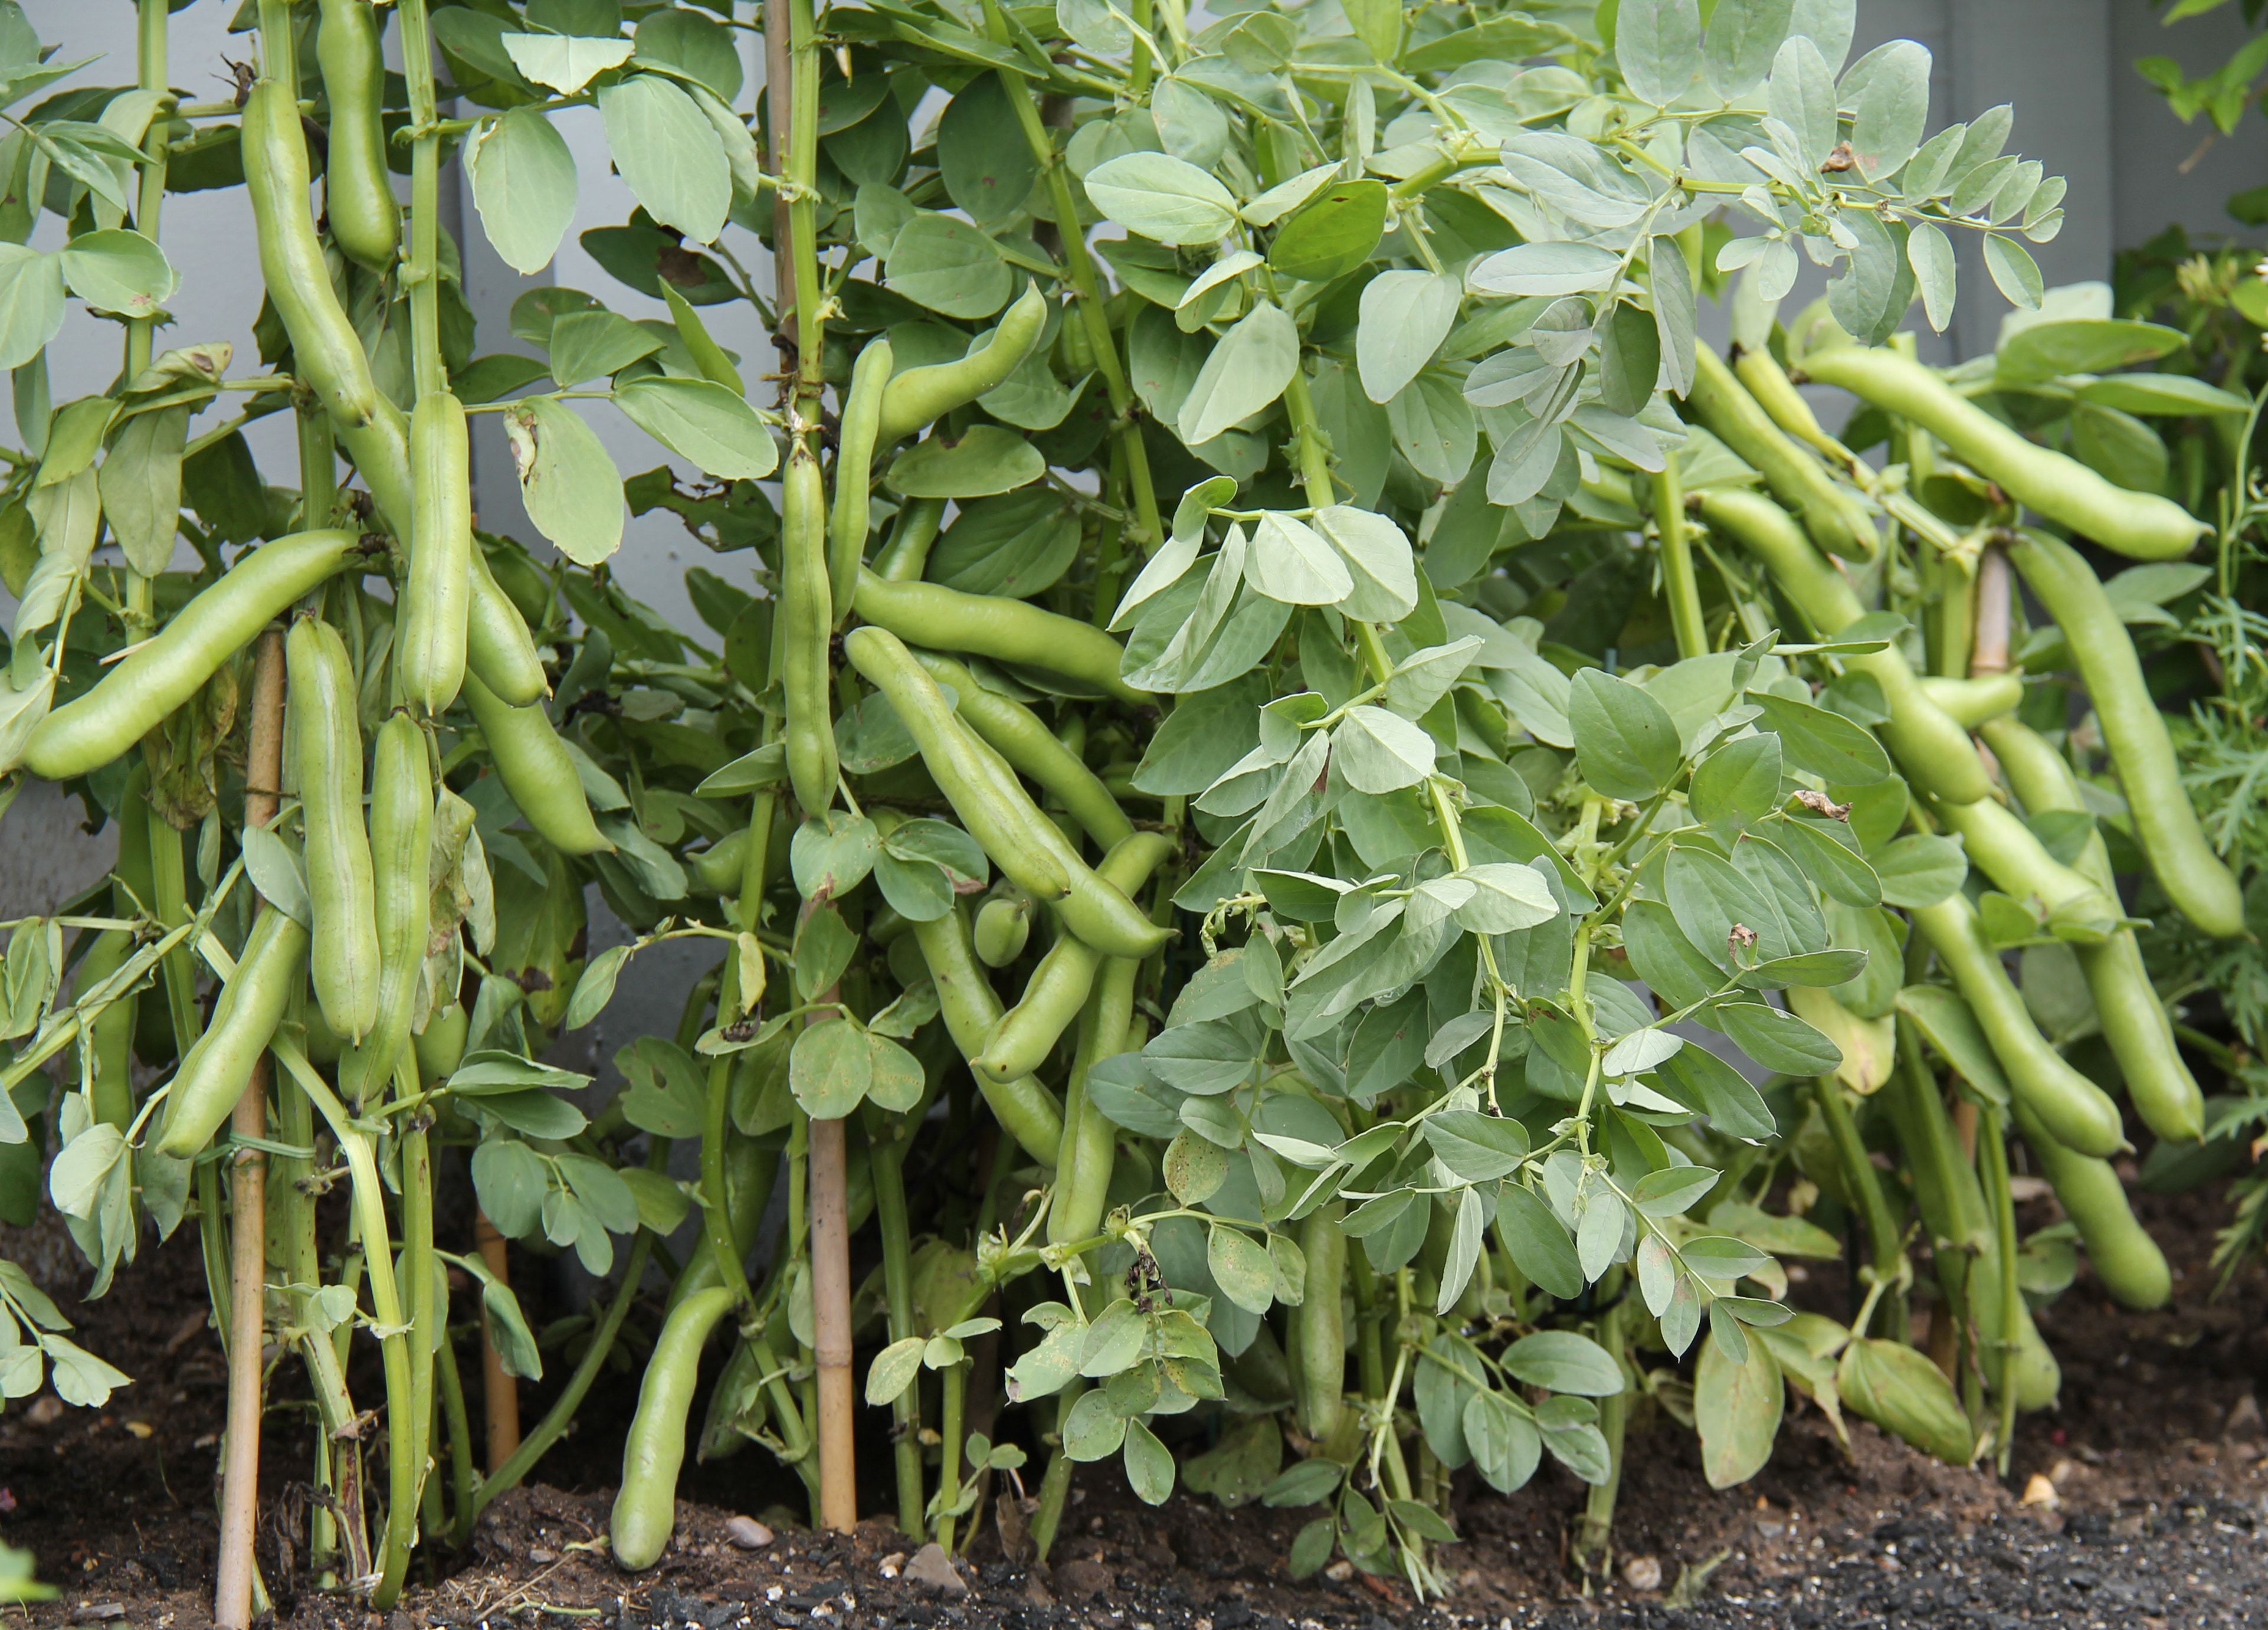 A Crop of Broad Bean Plants Ready for Harvesting.